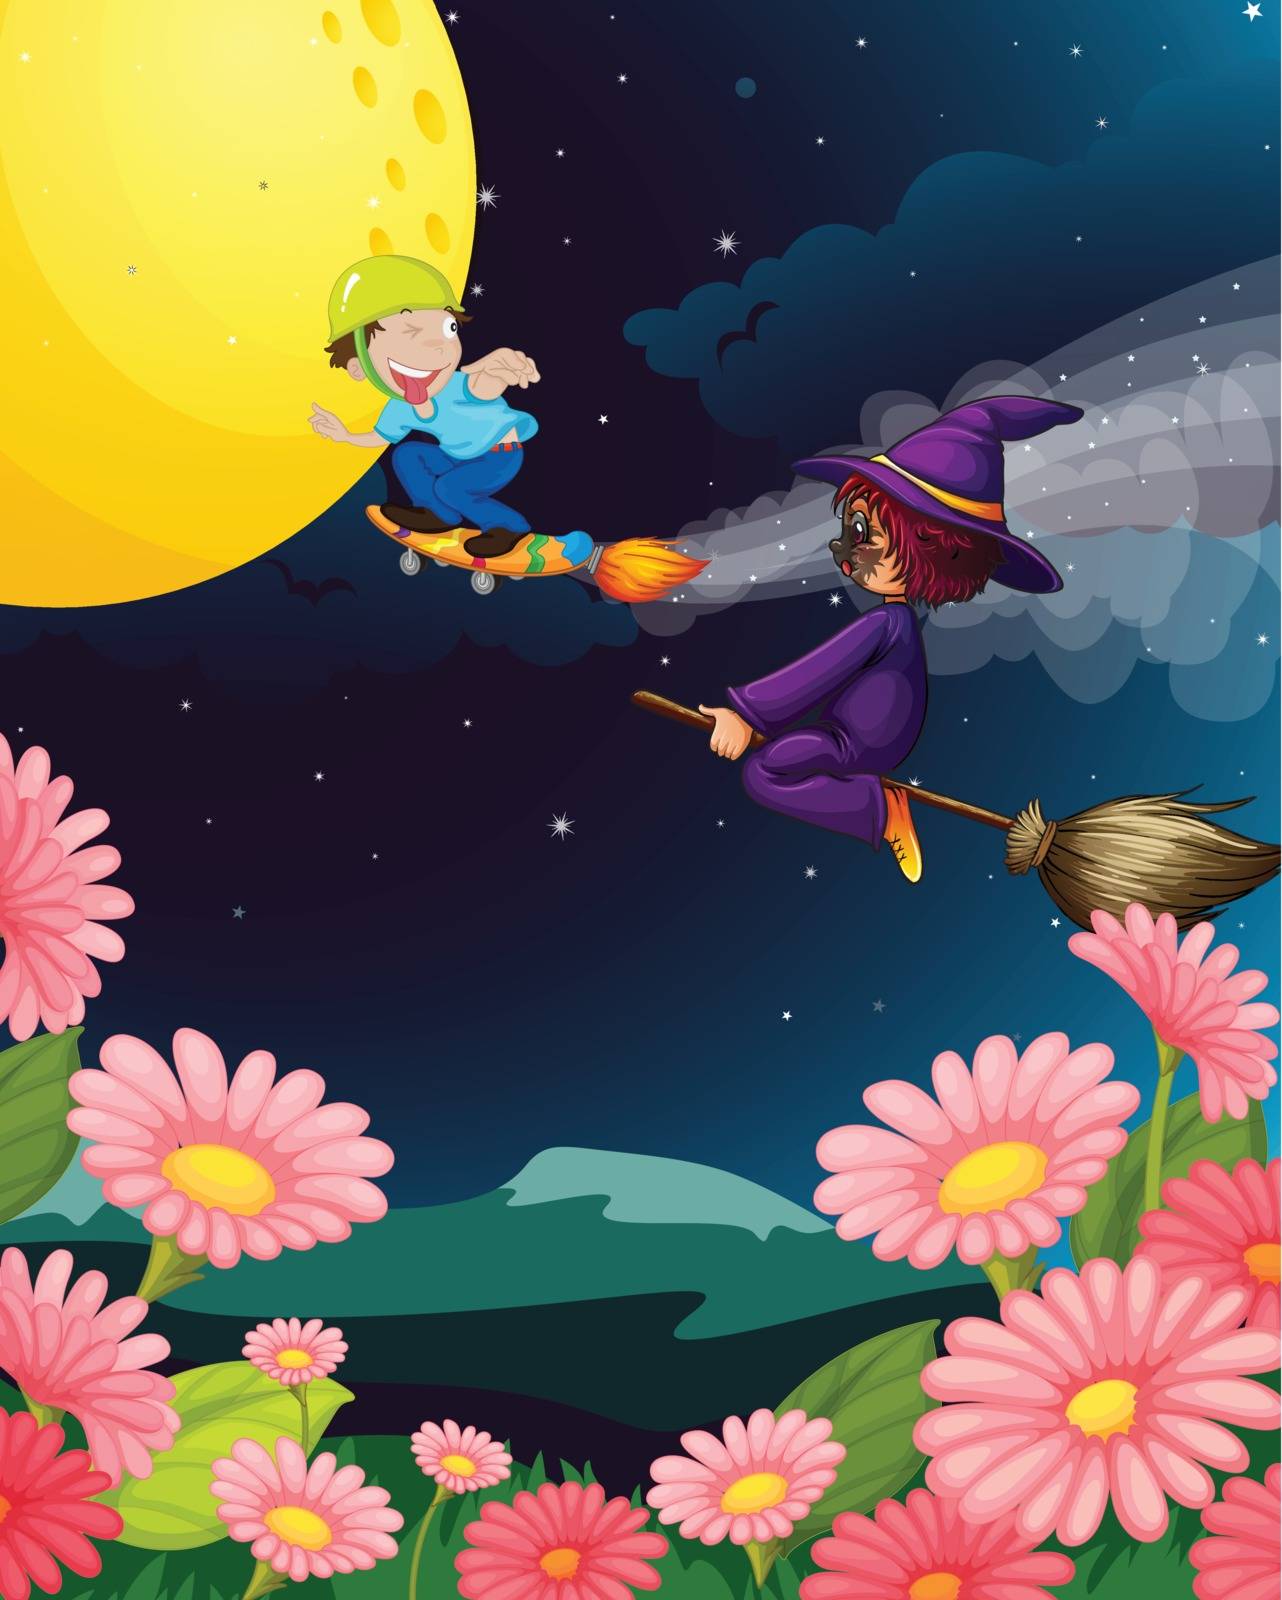 illustration of a boy and witch flying in the night